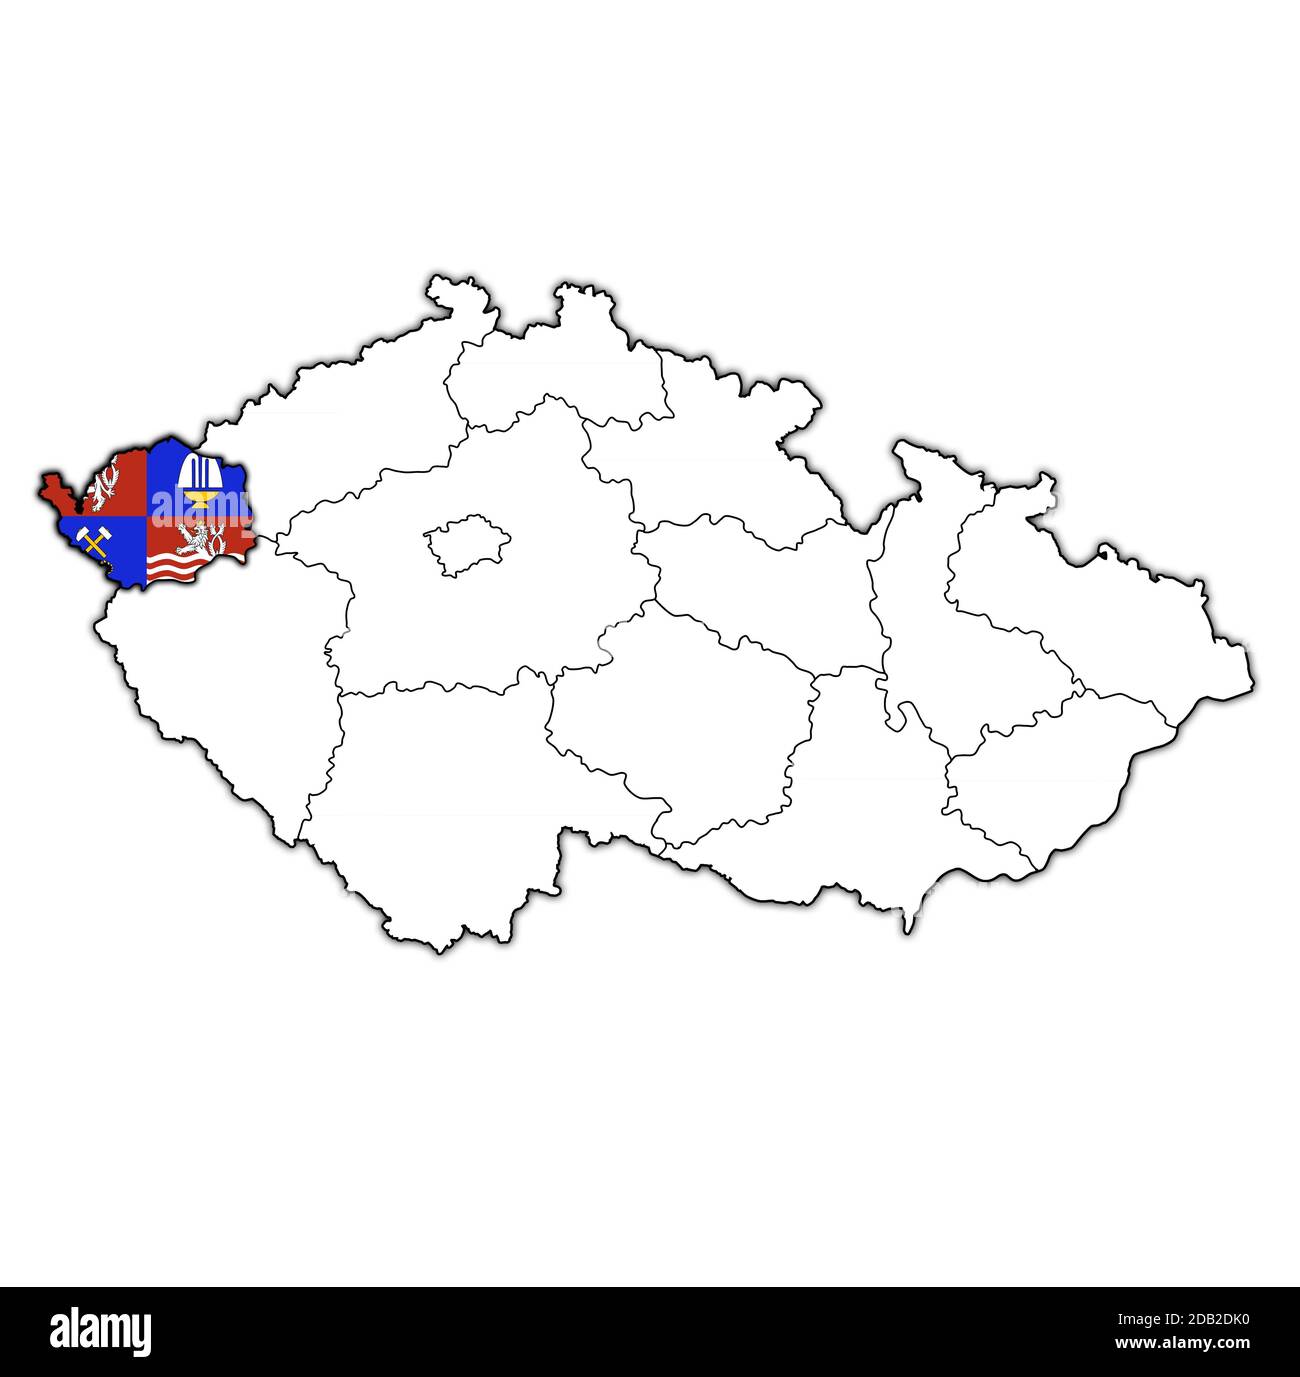 emblem of karlovy vary region on map with administrative divisions and borders of Czech Republic Stock Photo